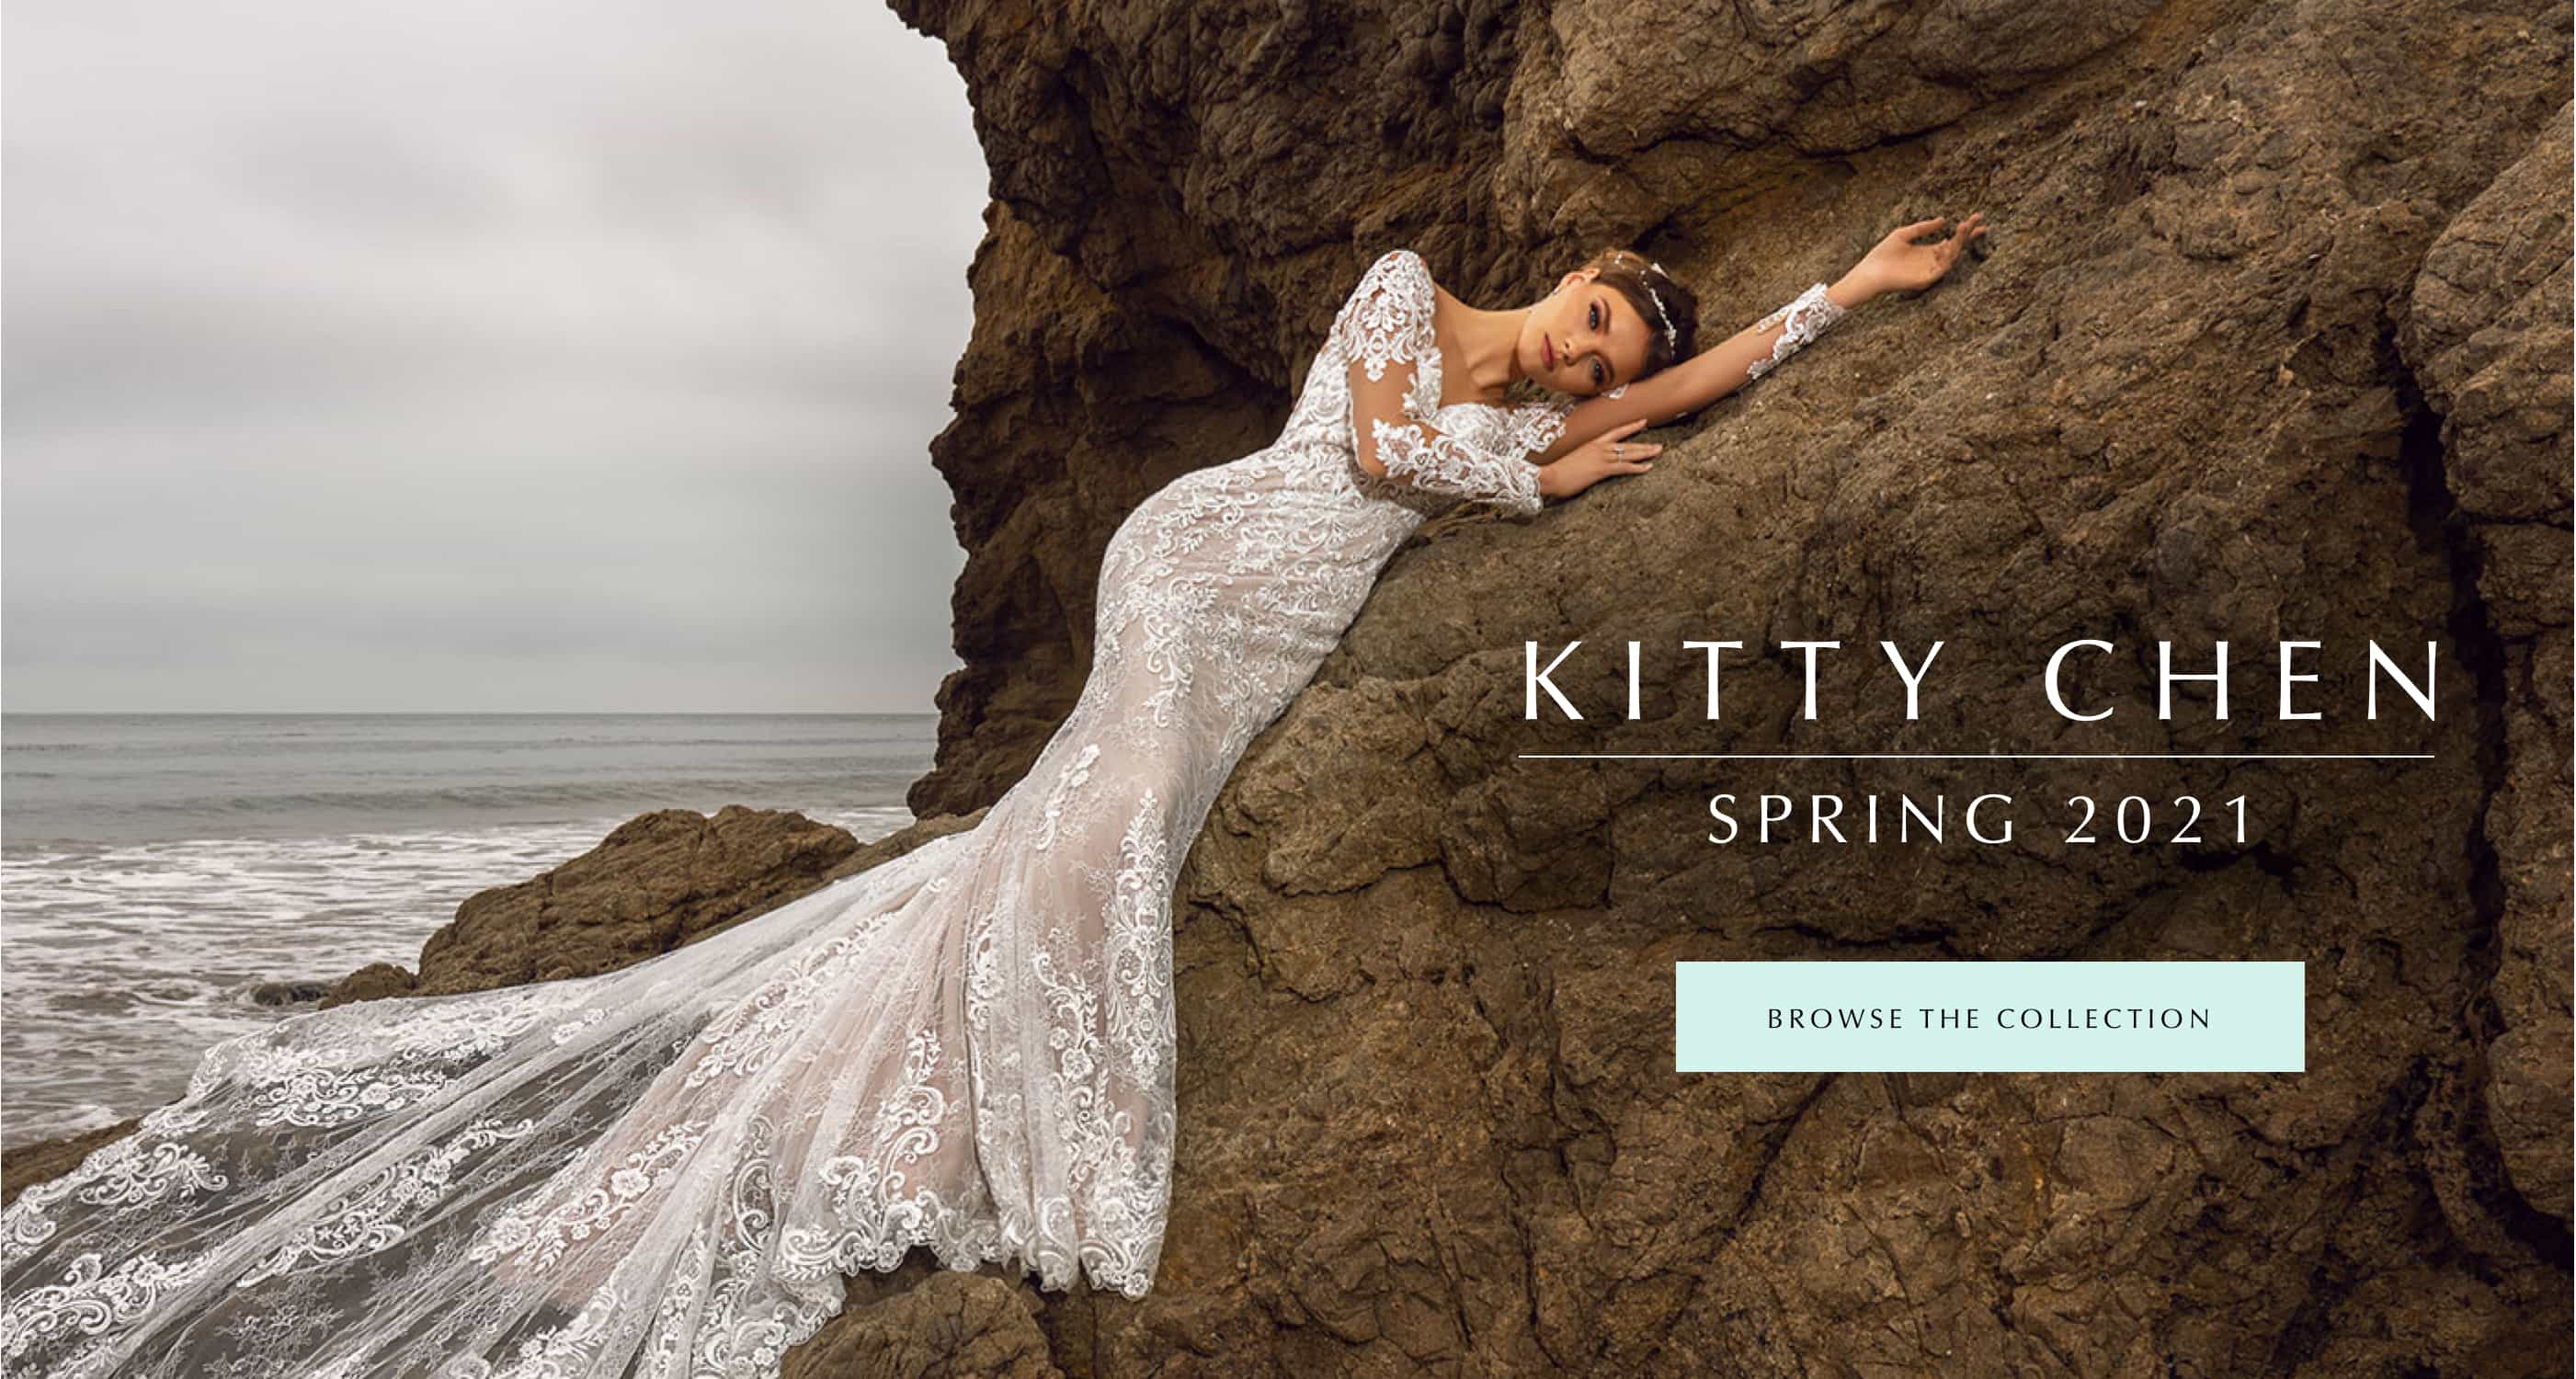 Model wearing a lace Kitty Chen wedding gown at the beach